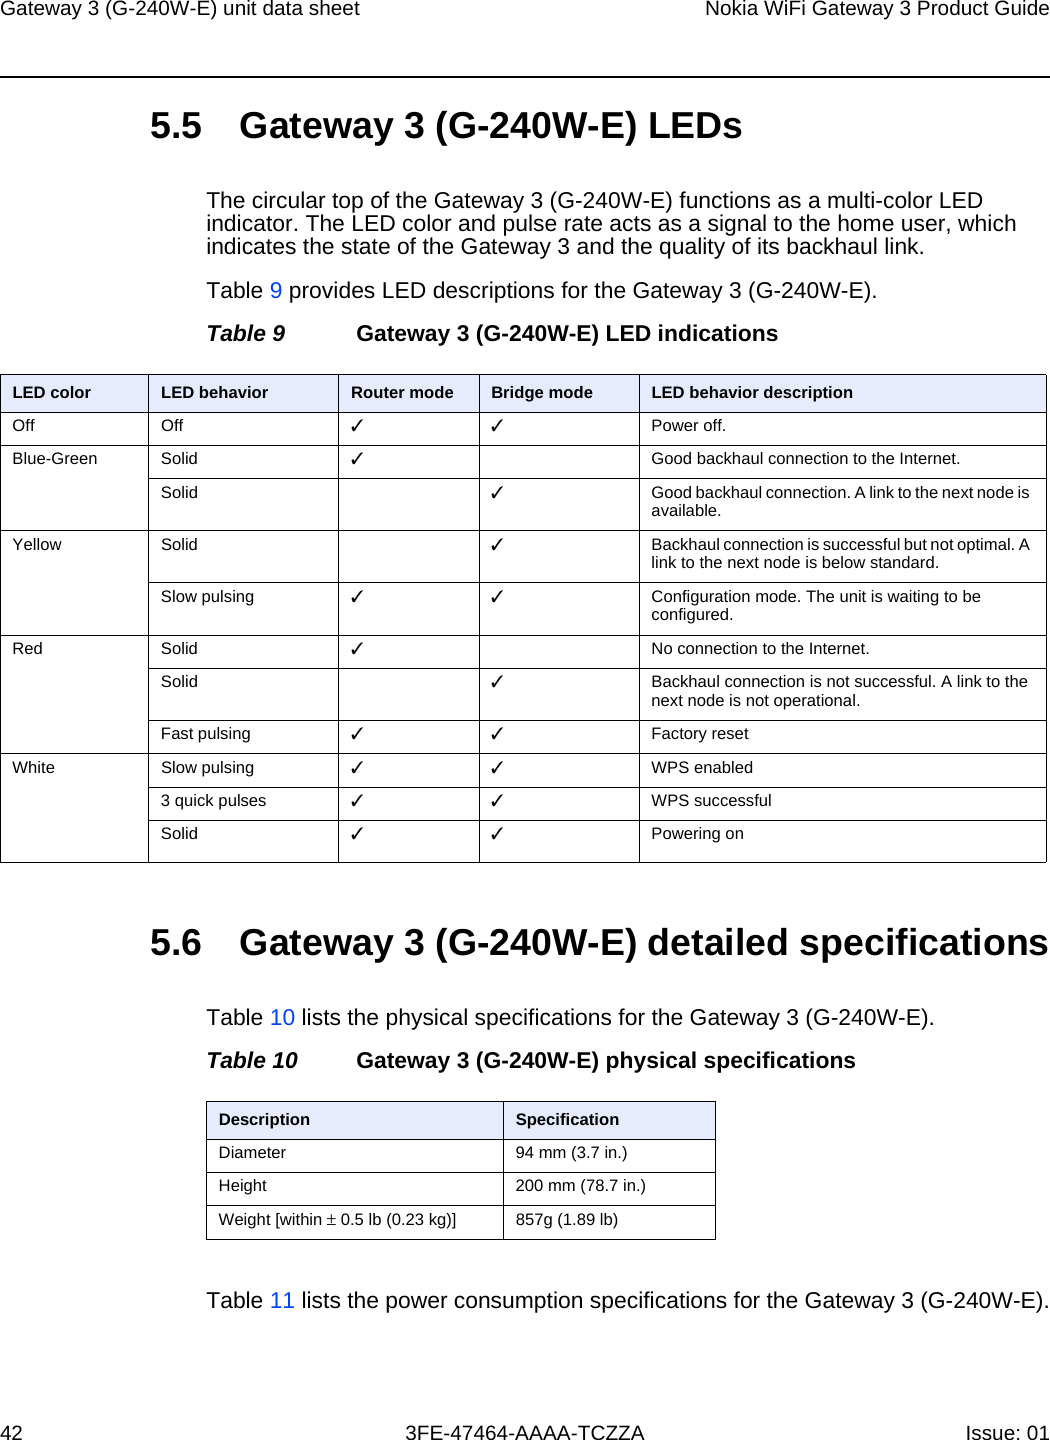 Gateway 3 (G-240W-E) unit data sheet42Nokia WiFi Gateway 3 Product Guide3FE-47464-AAAA-TCZZA Issue: 01 5.5 Gateway 3 (G-240W-E) LEDsThe circular top of the Gateway 3 (G-240W-E) functions as a multi-color LED indicator. The LED color and pulse rate acts as a signal to the home user, which indicates the state of the Gateway 3 and the quality of its backhaul link.Table 9 provides LED descriptions for the Gateway 3 (G-240W-E).Table 9 Gateway 3 (G-240W-E) LED indications5.6 Gateway 3 (G-240W-E) detailed specificationsTable 10 lists the physical specifications for the Gateway 3 (G-240W-E).Table 10 Gateway 3 (G-240W-E) physical specificationsTable 11 lists the power consumption specifications for the Gateway 3 (G-240W-E).LED color LED behavior Router mode Bridge mode LED behavior descriptionOff Off ✓✓ Power off.Blue-Green Solid ✓Good backhaul connection to the Internet.Solid ✓Good backhaul connection. A link to the next node is available.Yellow Solid ✓Backhaul connection is successful but not optimal. A link to the next node is below standard.Slow pulsing ✓✓ Configuration mode. The unit is waiting to be configured.Red Solid ✓No connection to the Internet.Solid ✓Backhaul connection is not successful. A link to the next node is not operational.Fast pulsing ✓✓ Factory resetWhite Slow pulsing ✓✓ WPS enabled3 quick pulses ✓✓ WPS successfulSolid ✓✓ Powering onDescription SpecificationDiameter 94 mm (3.7 in.)Height 200 mm (78.7 in.)Weight [within ± 0.5 lb (0.23 kg)] 857g (1.89 lb)